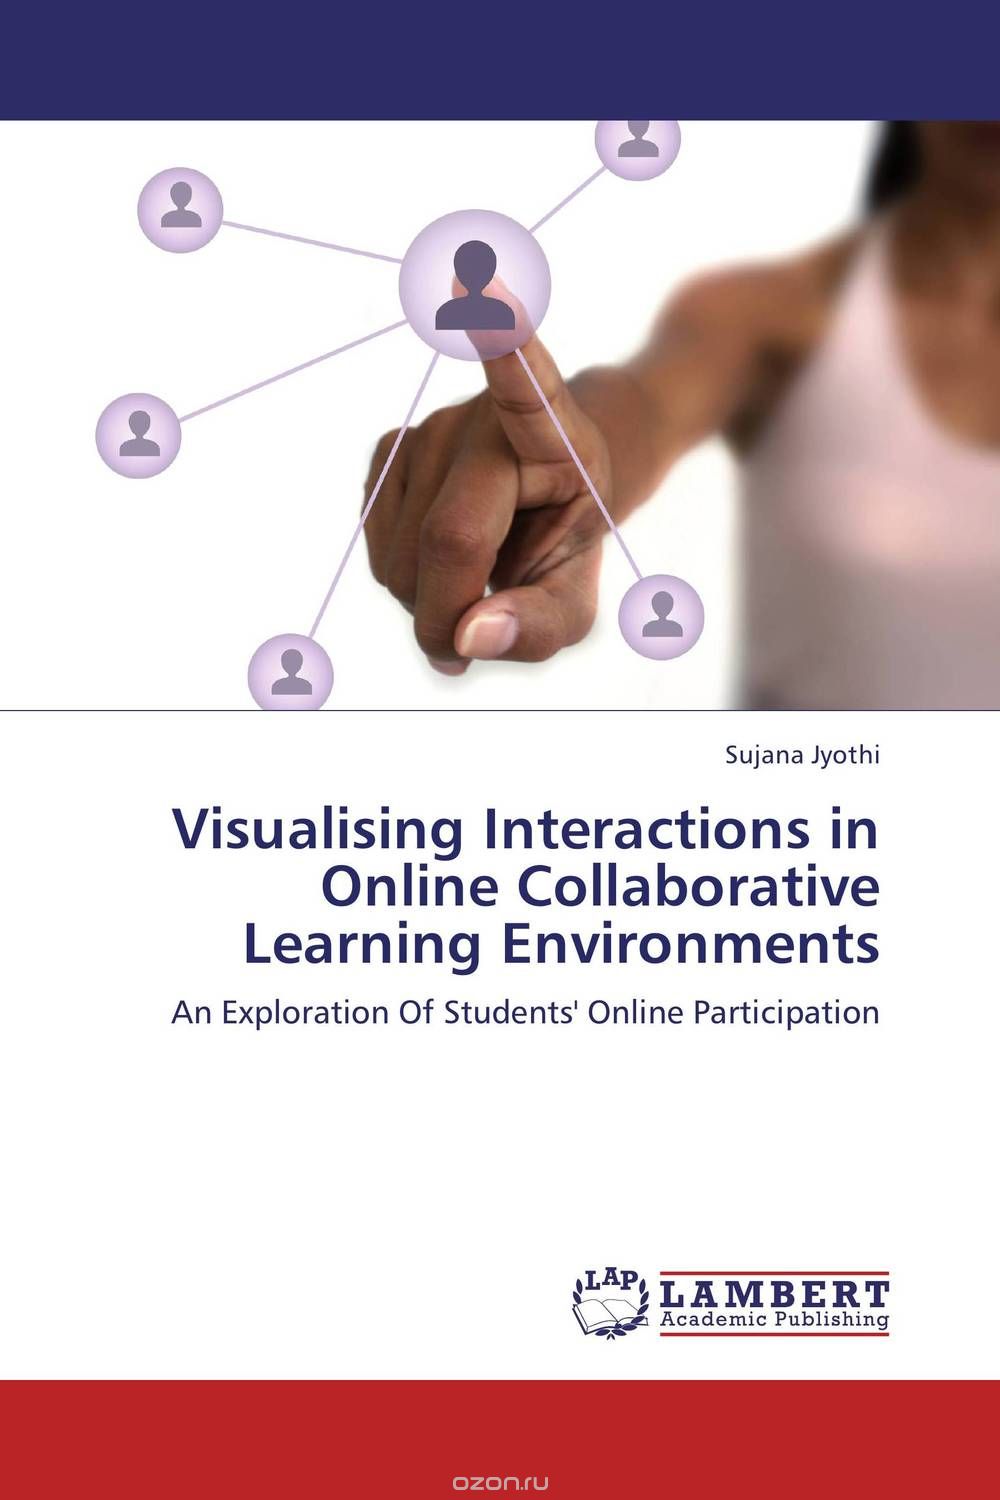 Visualising Interactions in Online Collaborative Learning Environments